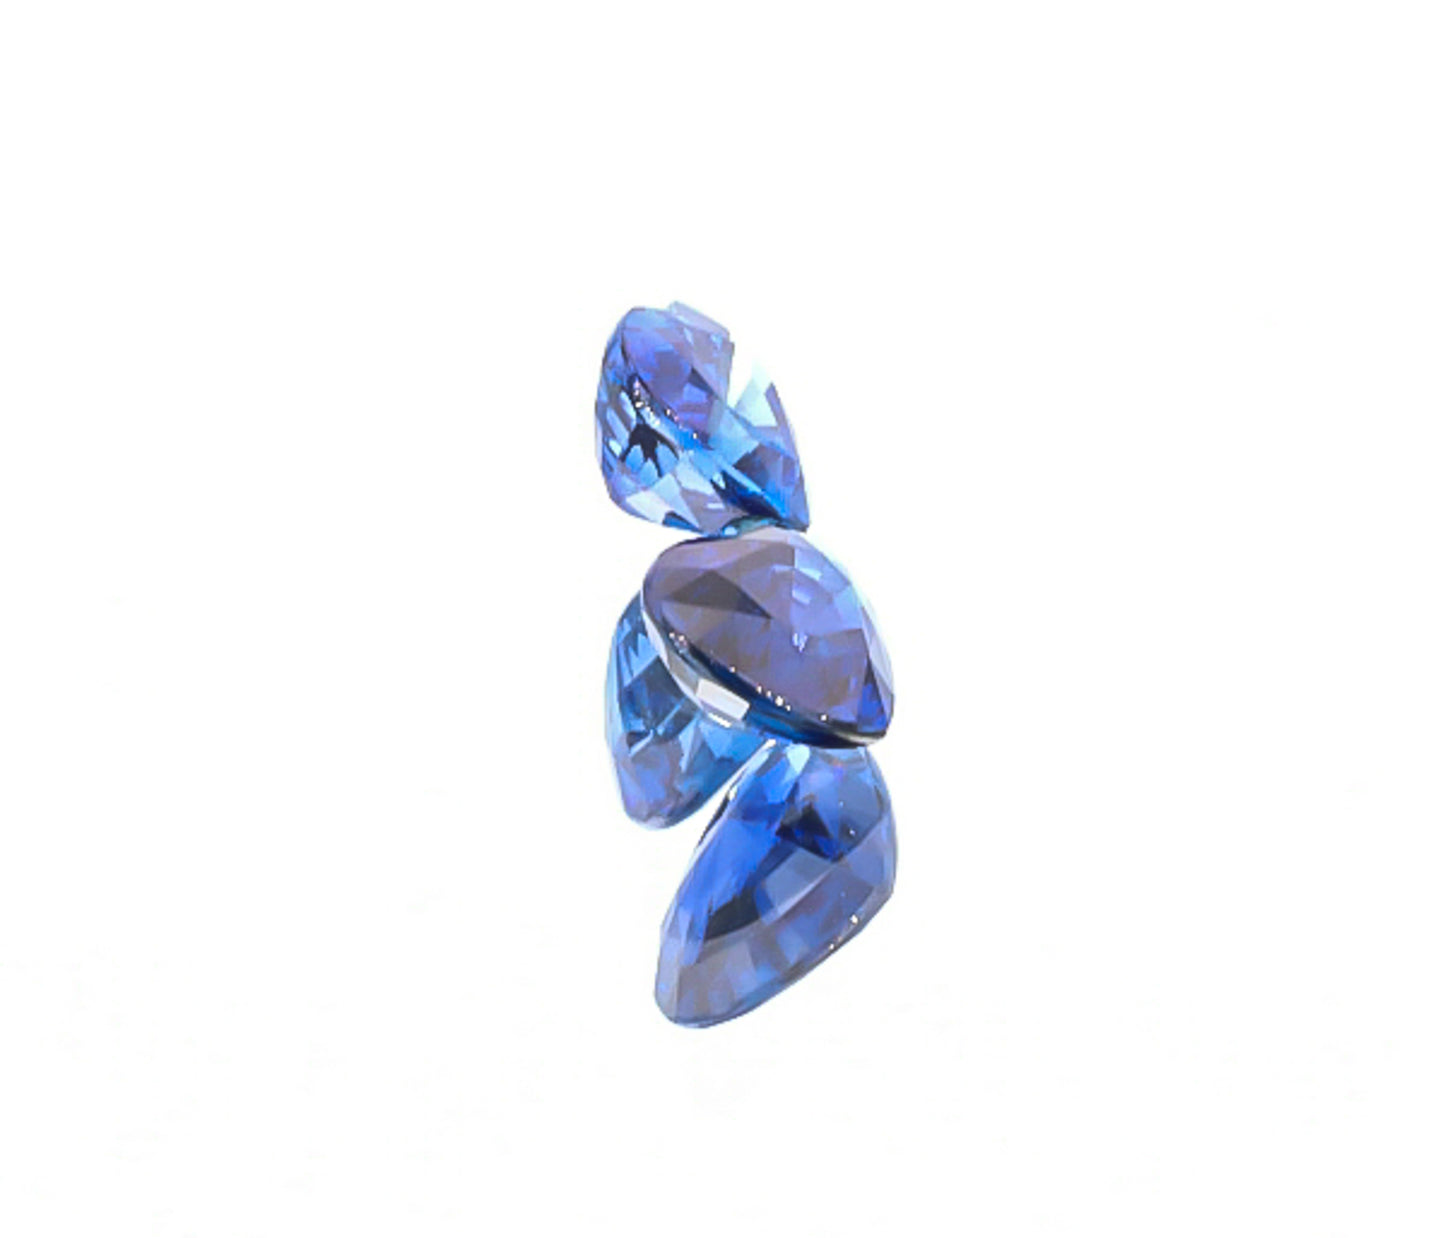 Load image into Gallery viewer, Natural Blue Sapphire Pair Heart Shape 4.03 Total Carat Weight With GIA Report
